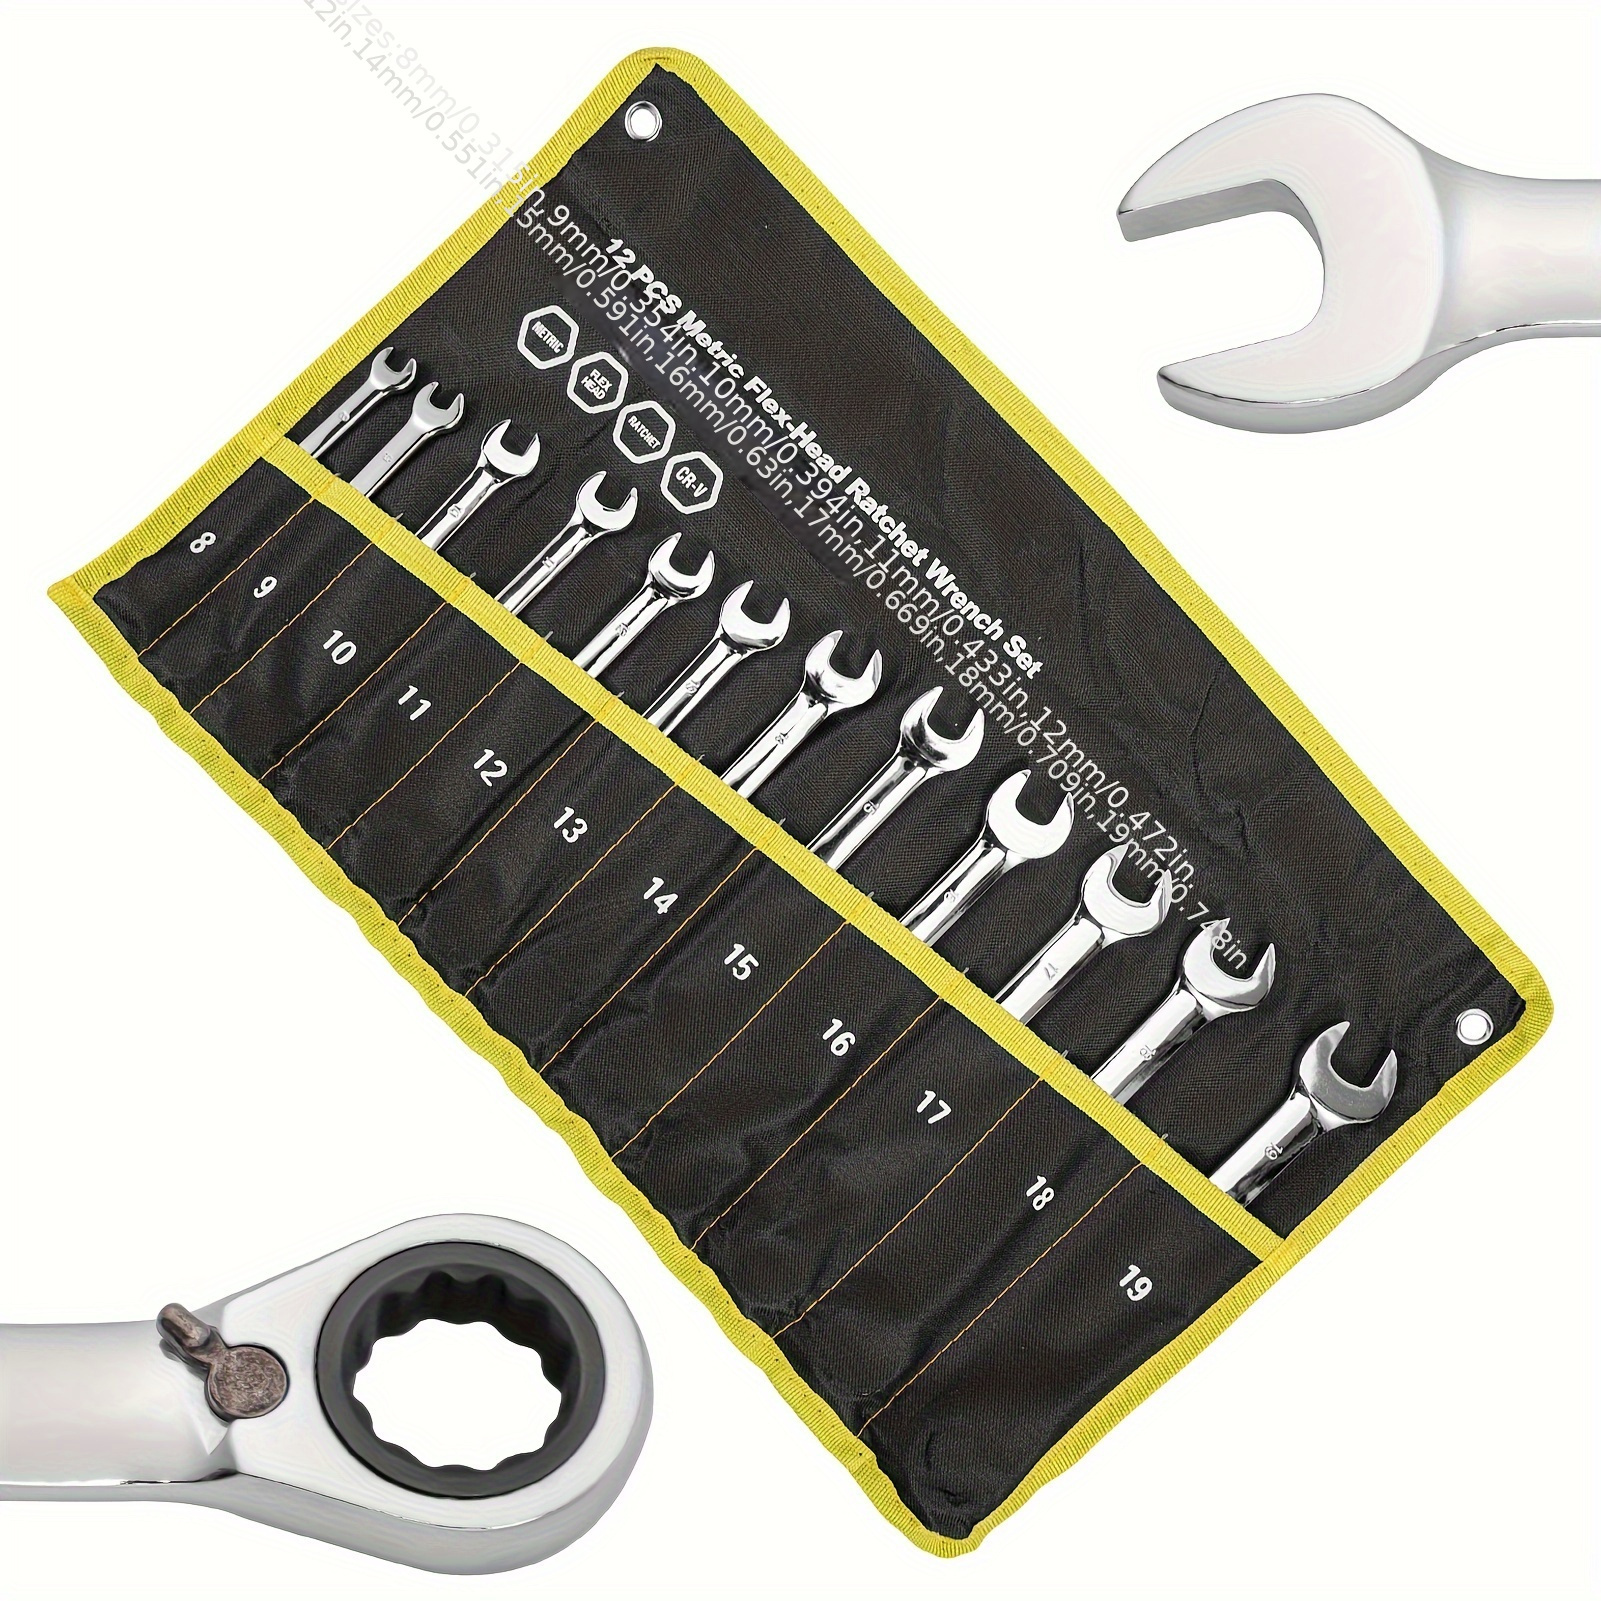 

12-piece Wrench Set, Reversible Ratcheting Combination Set, Metric 8mm-19mm, 72 Teeth, Cr-v Steel Ratchet Wrenches Set With Storage Bag For Motorcycle/ Car/ Mechanical Etc.